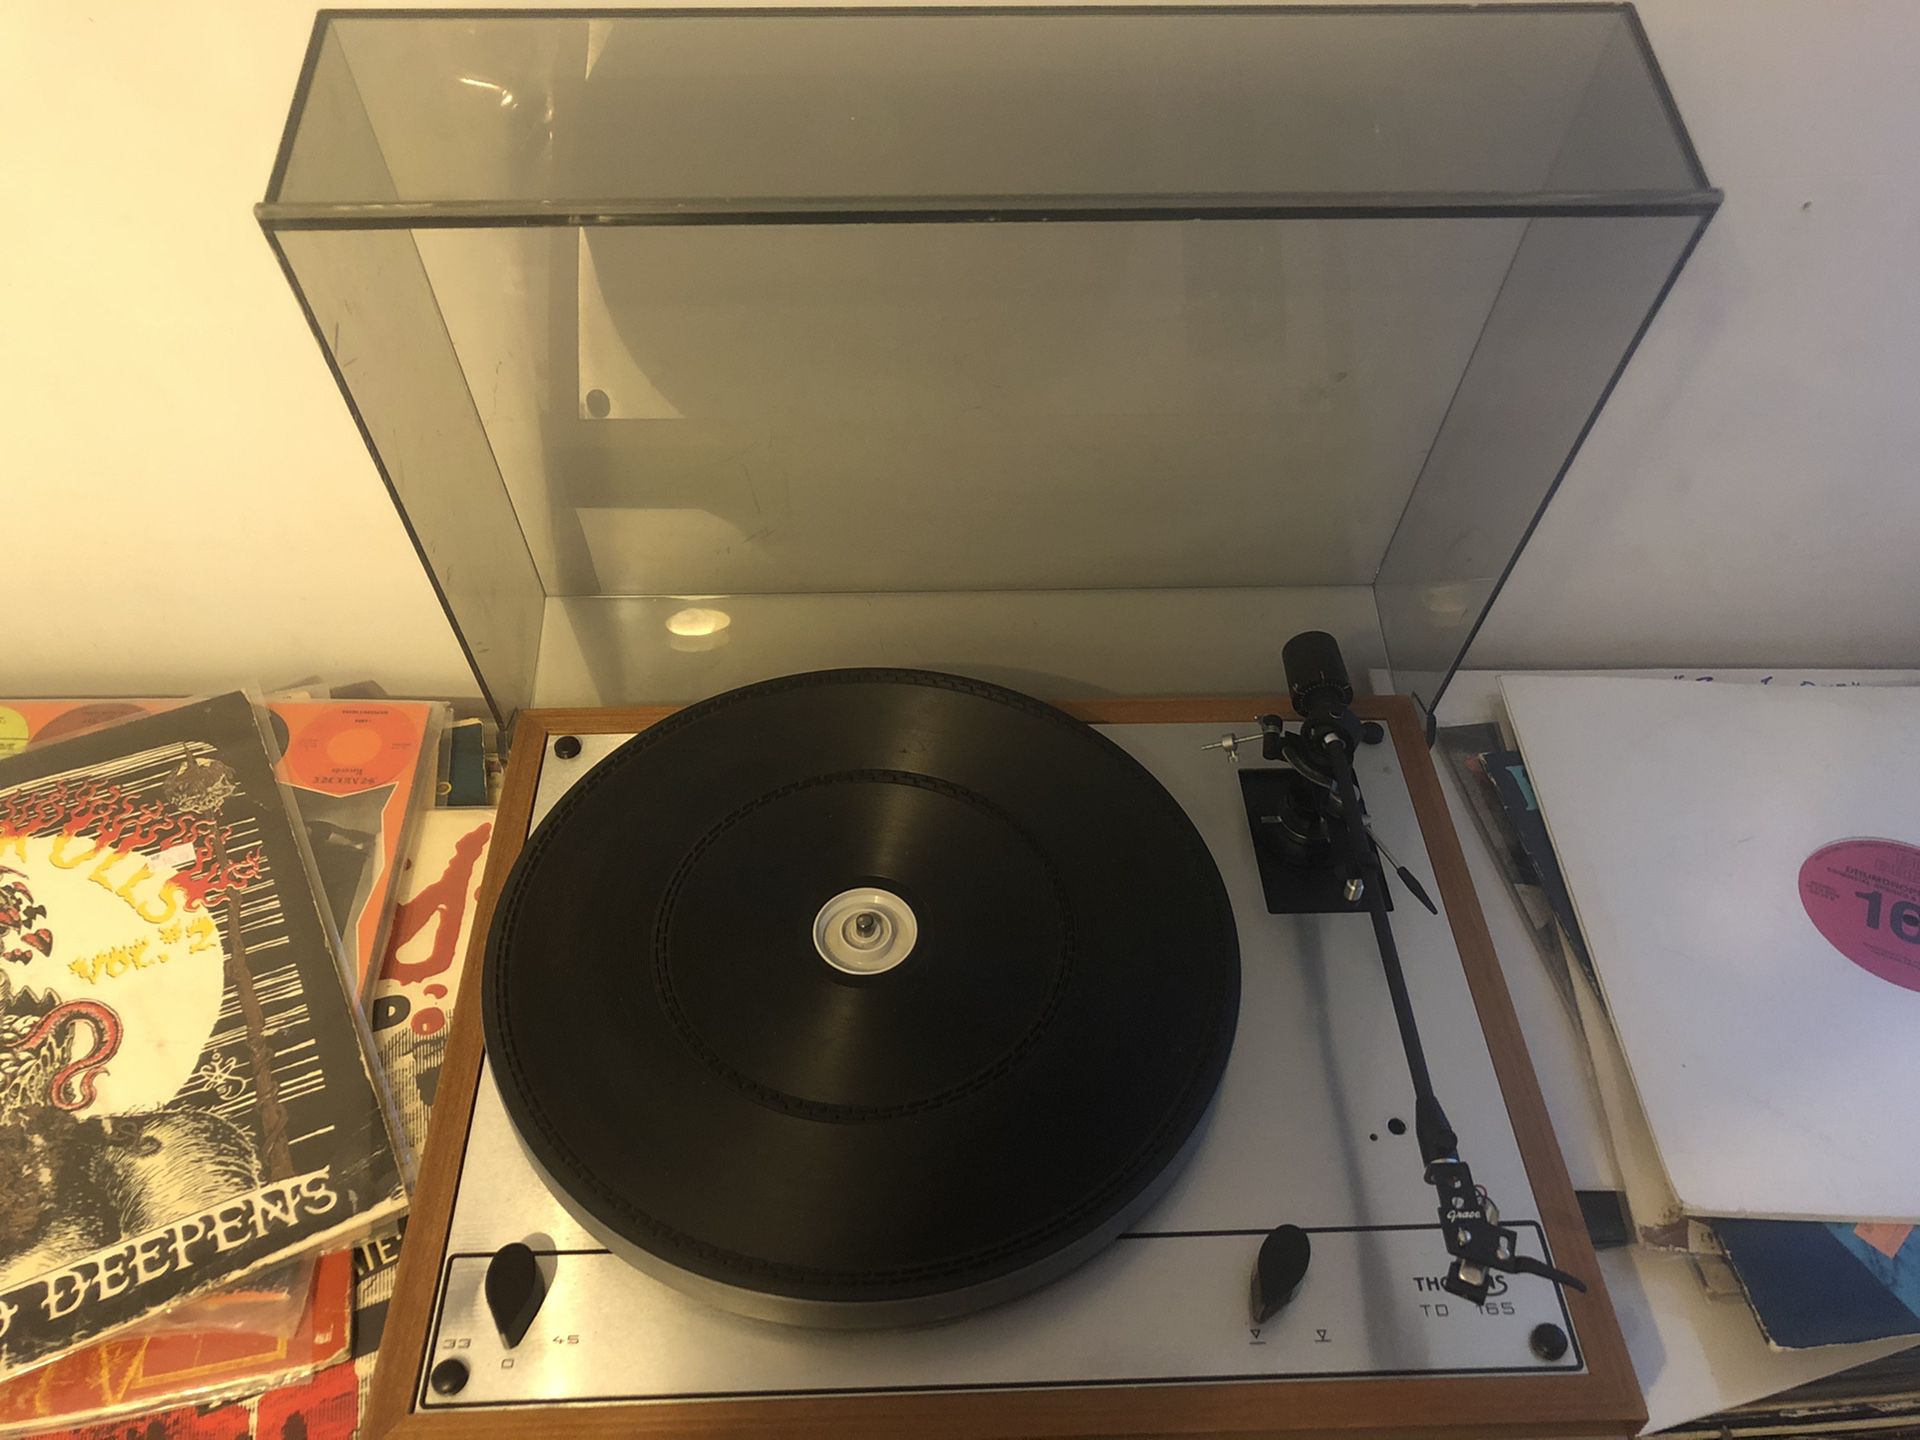 Thorens turntable TD165 with Grace 747 tonearm record player